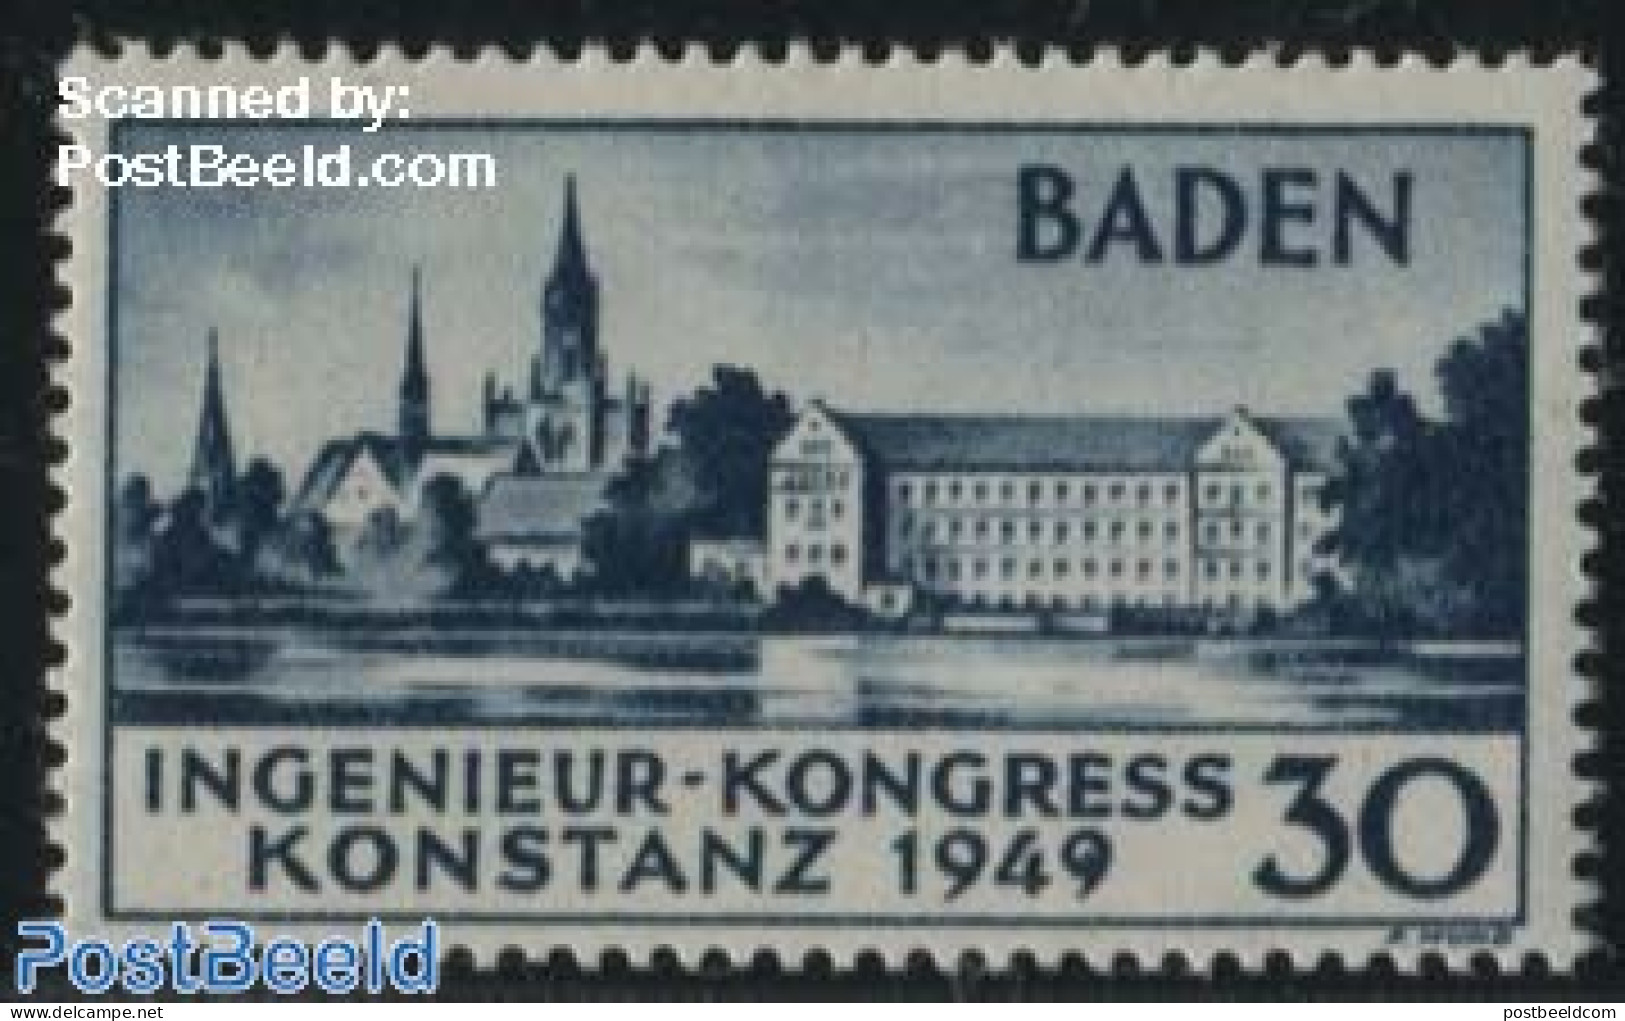 Germany, French Zone 1949 European Engineering Congress 1v, Plate Flaw: Dot In Second 9, Mint NH, History - Europa Han.. - Europäischer Gedanke